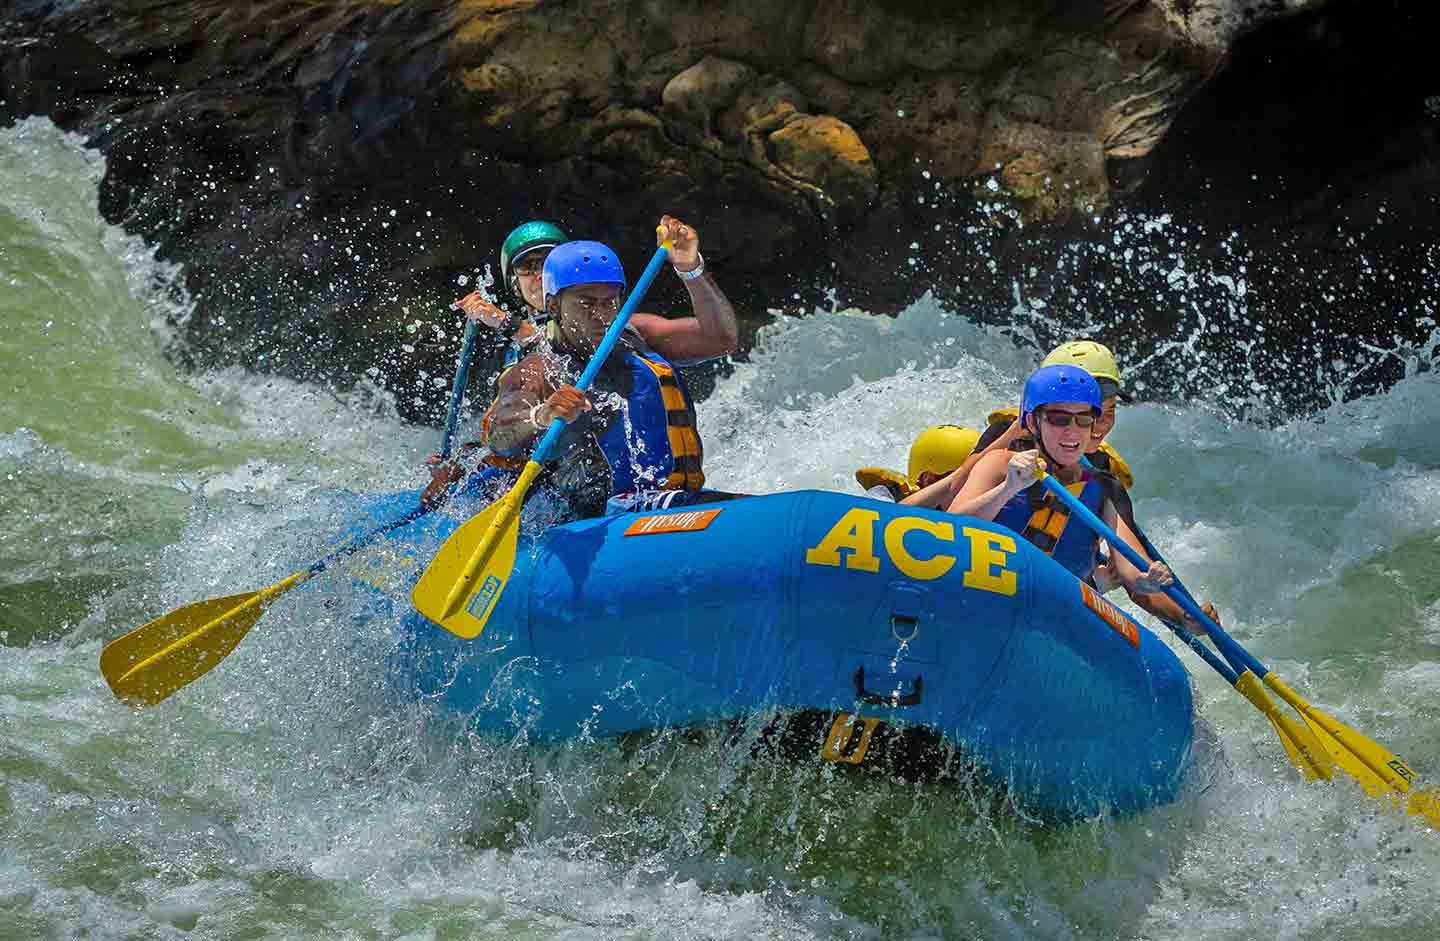 Guests raft through Lower Keeney Rapid in the New River Gorge National Park on an ACE Adventure Resort whitewater rafting trip.